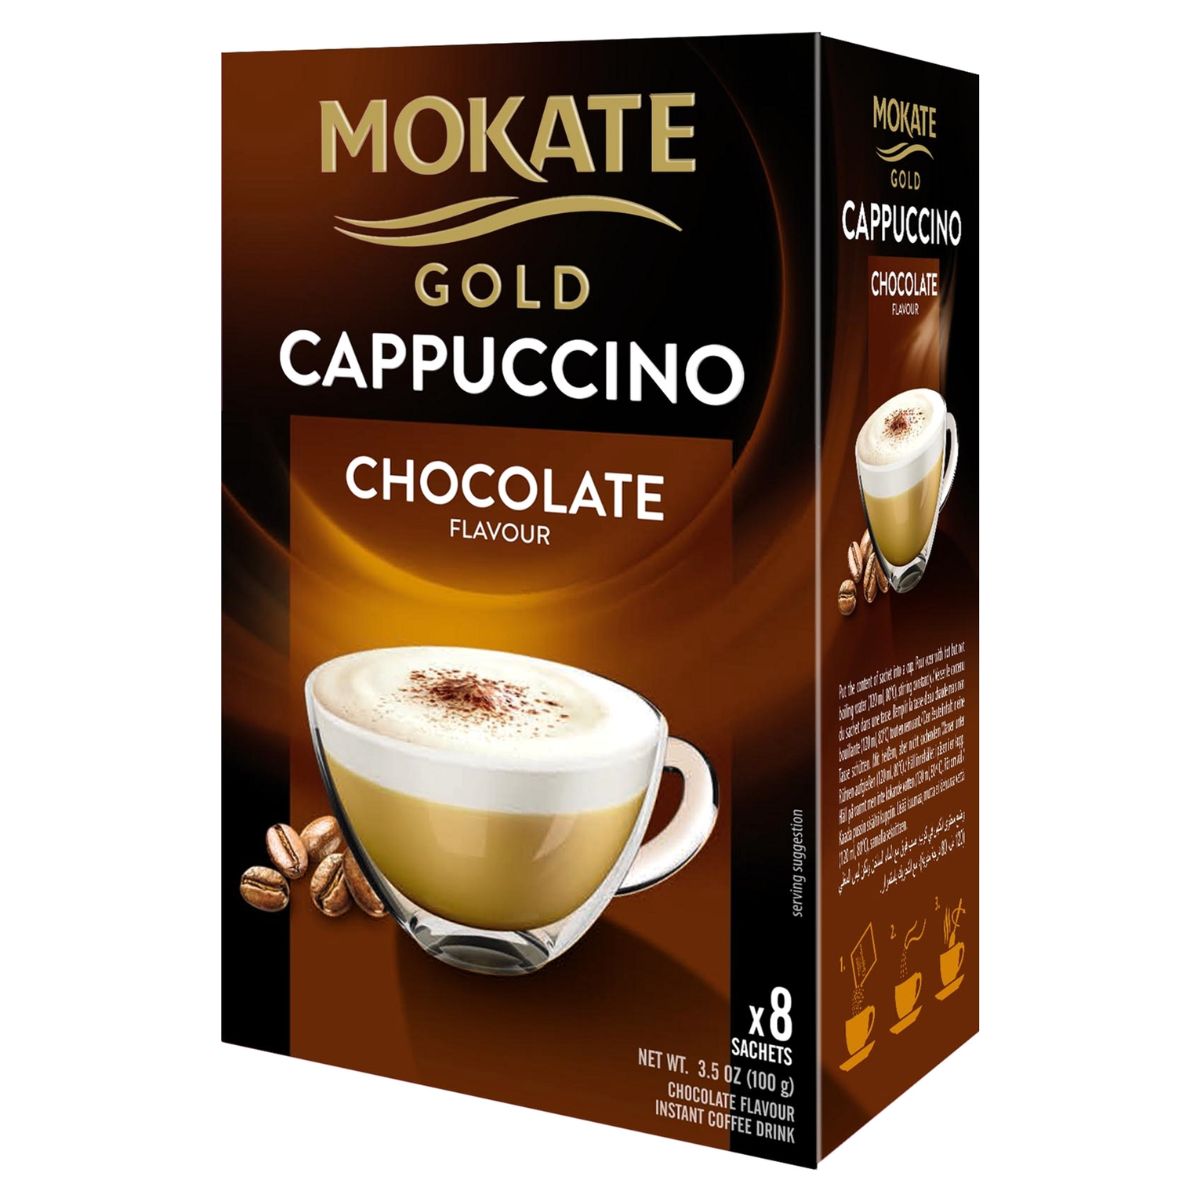 Mokate - Gold Cappuccino Chocolate Flavour - 8 Sachets.